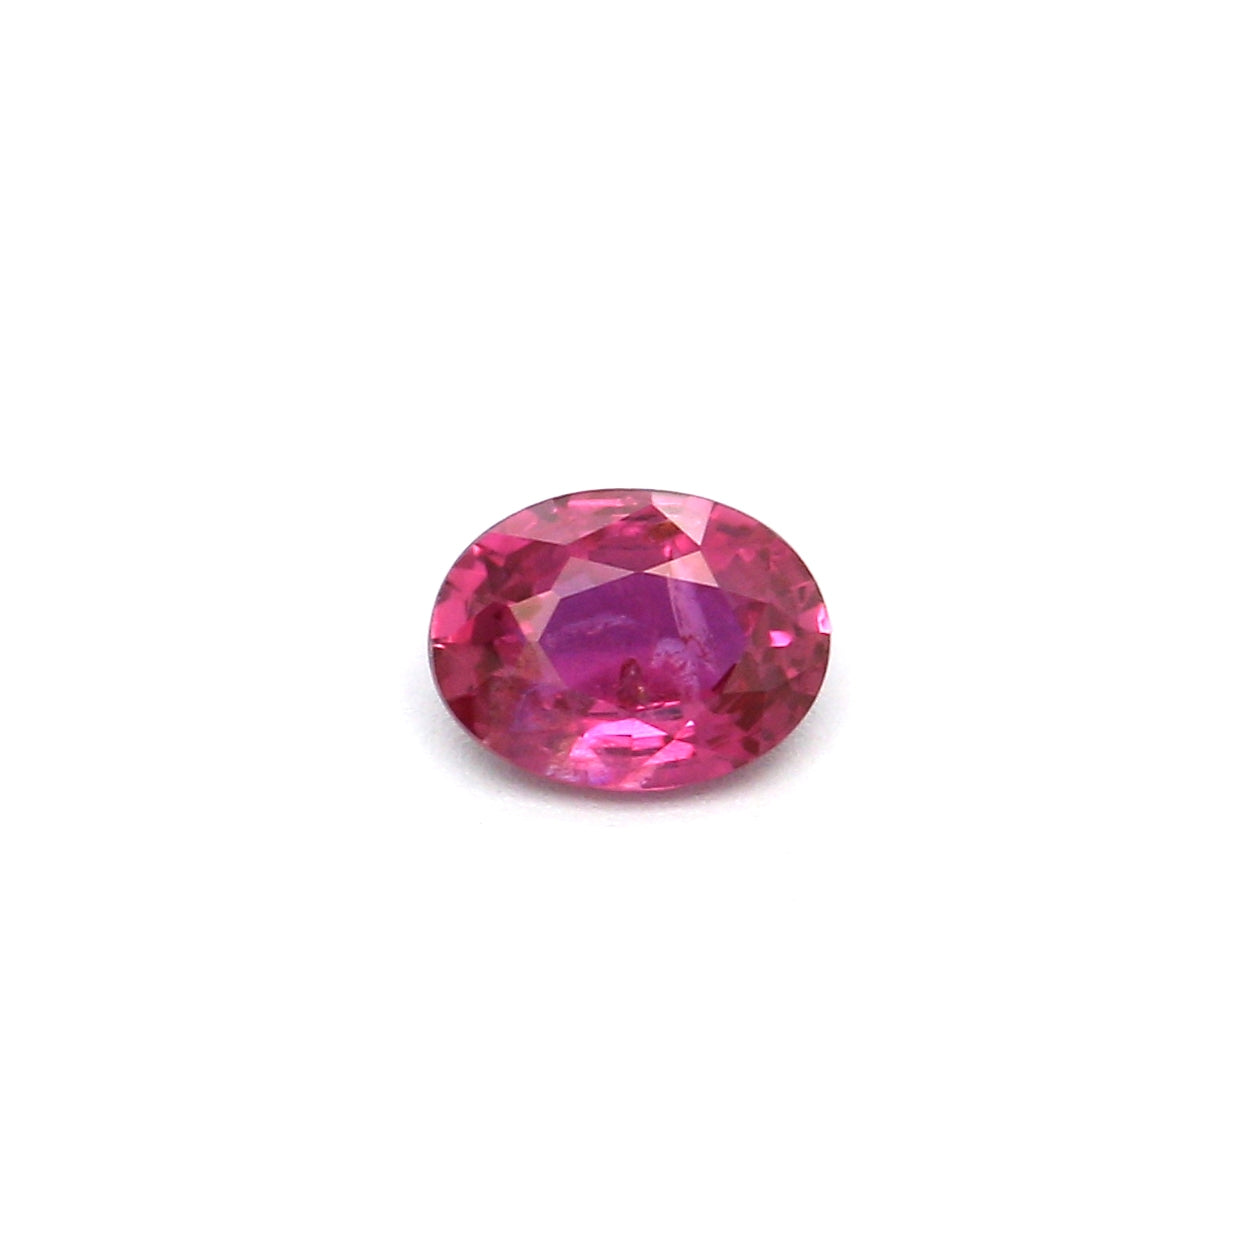 0.24ct Pink, Oval Sapphire, Heated, Thailand - 4.42 x 3.34 x 1.91mm